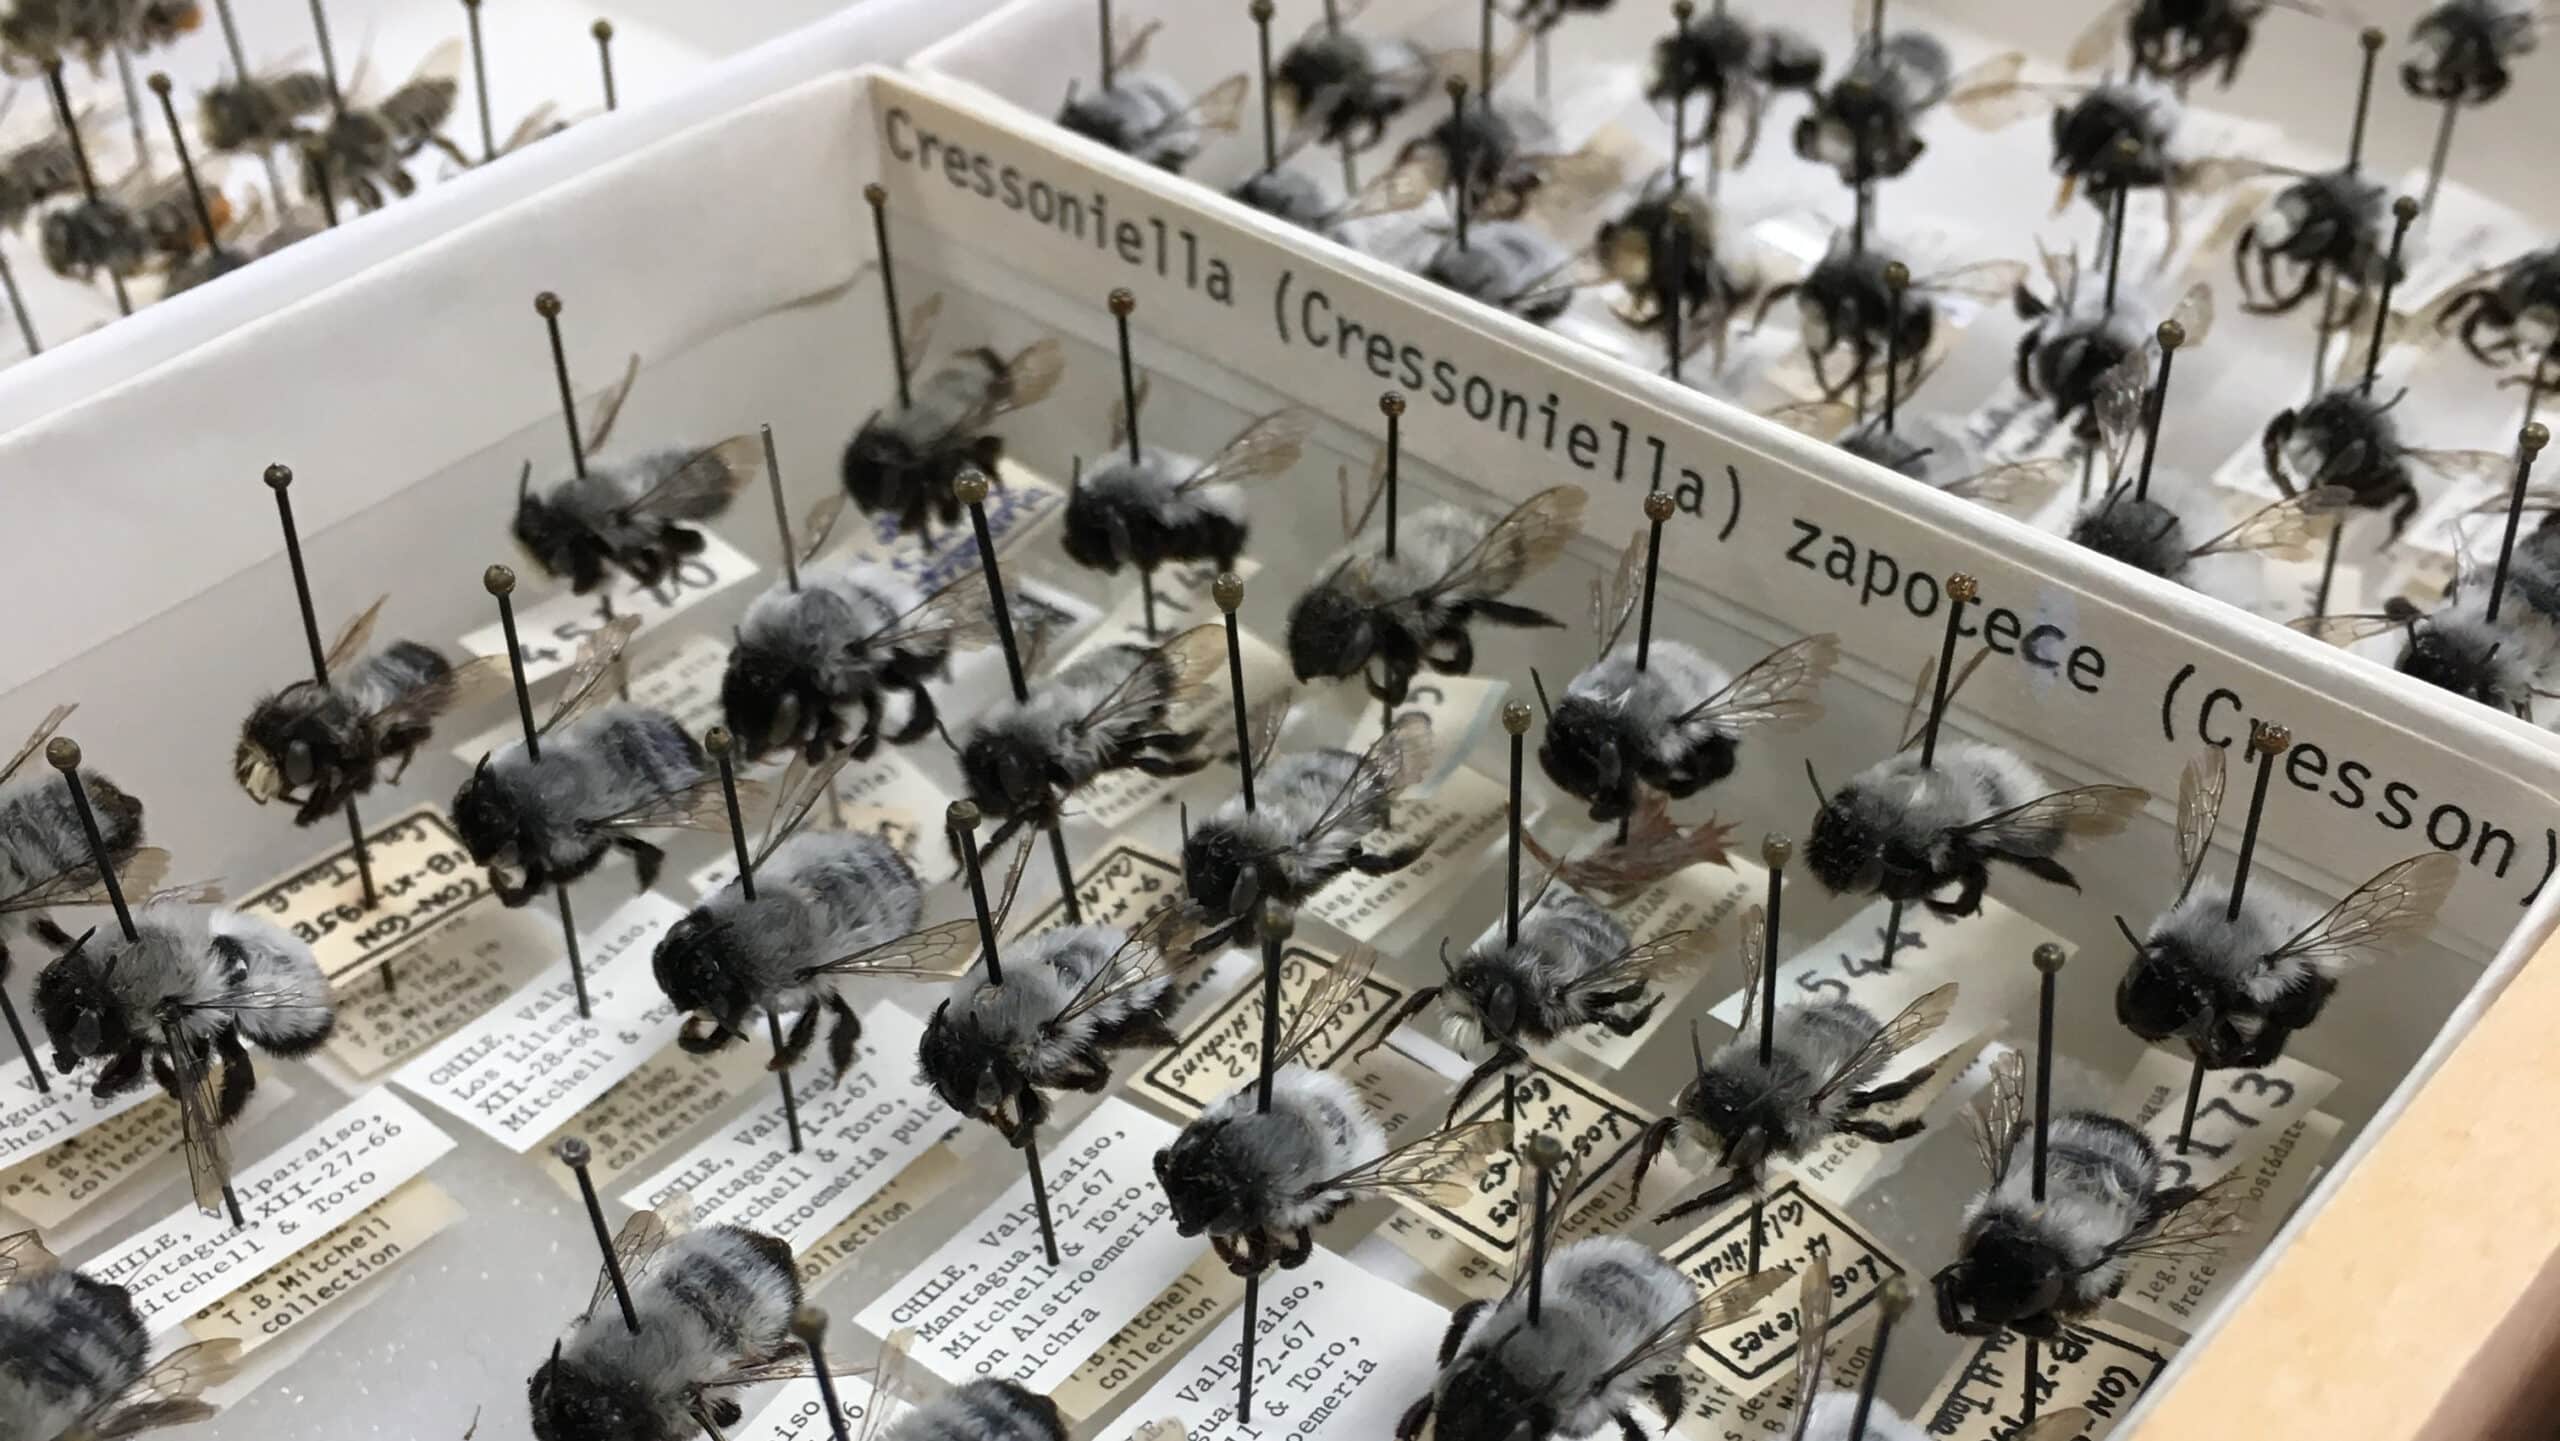 Pinned bees in a collection.